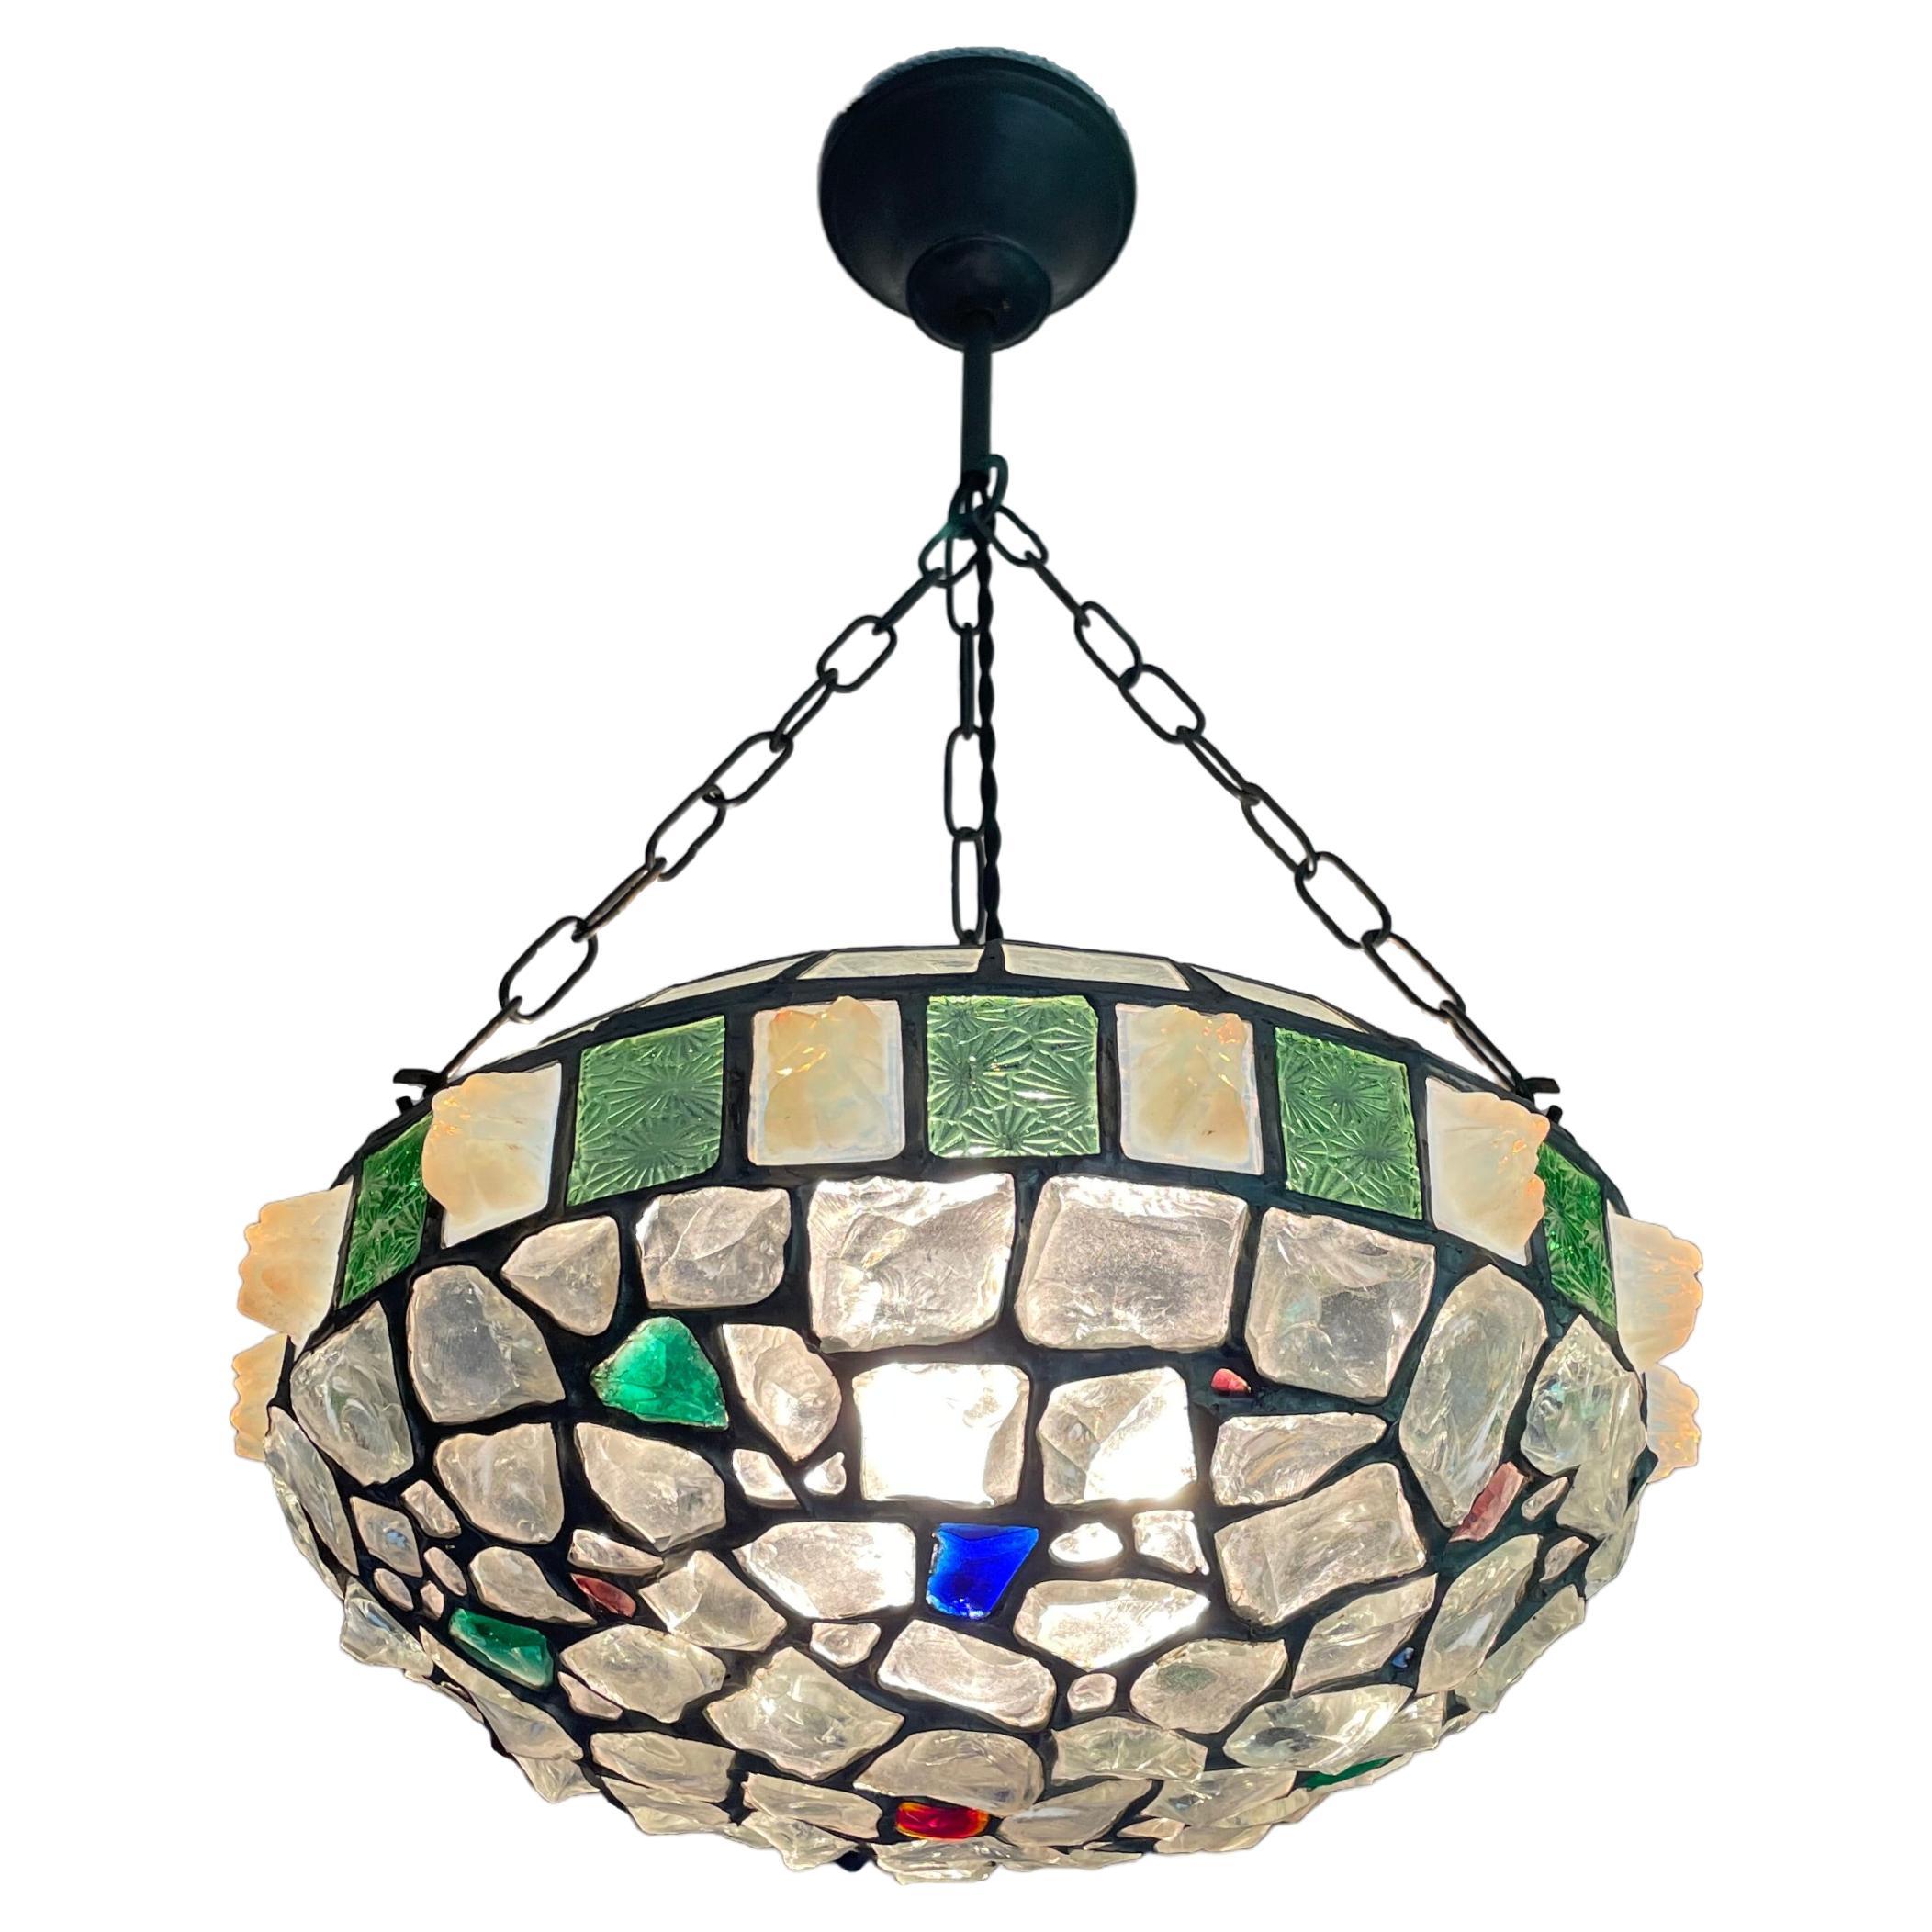 Handmade Glorious Antique Stained & Chunky Glass Arts & Crafts Pendant Light